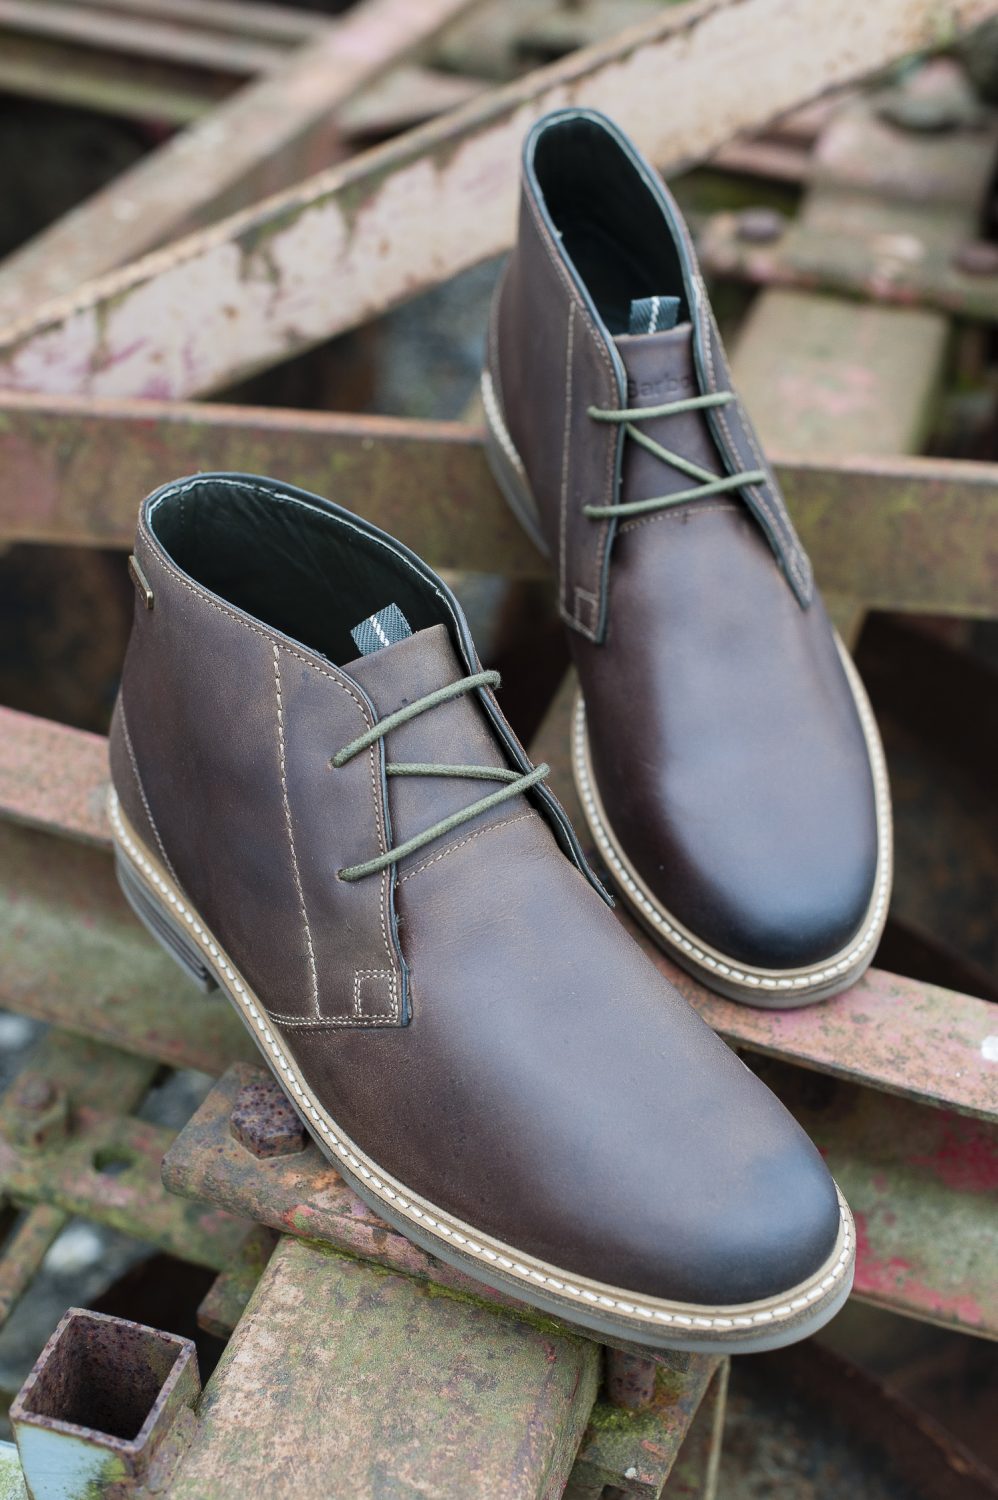 Barbour lace-ups, £125, The Golden Boot, Maidstone thegoldenboot.co.uk